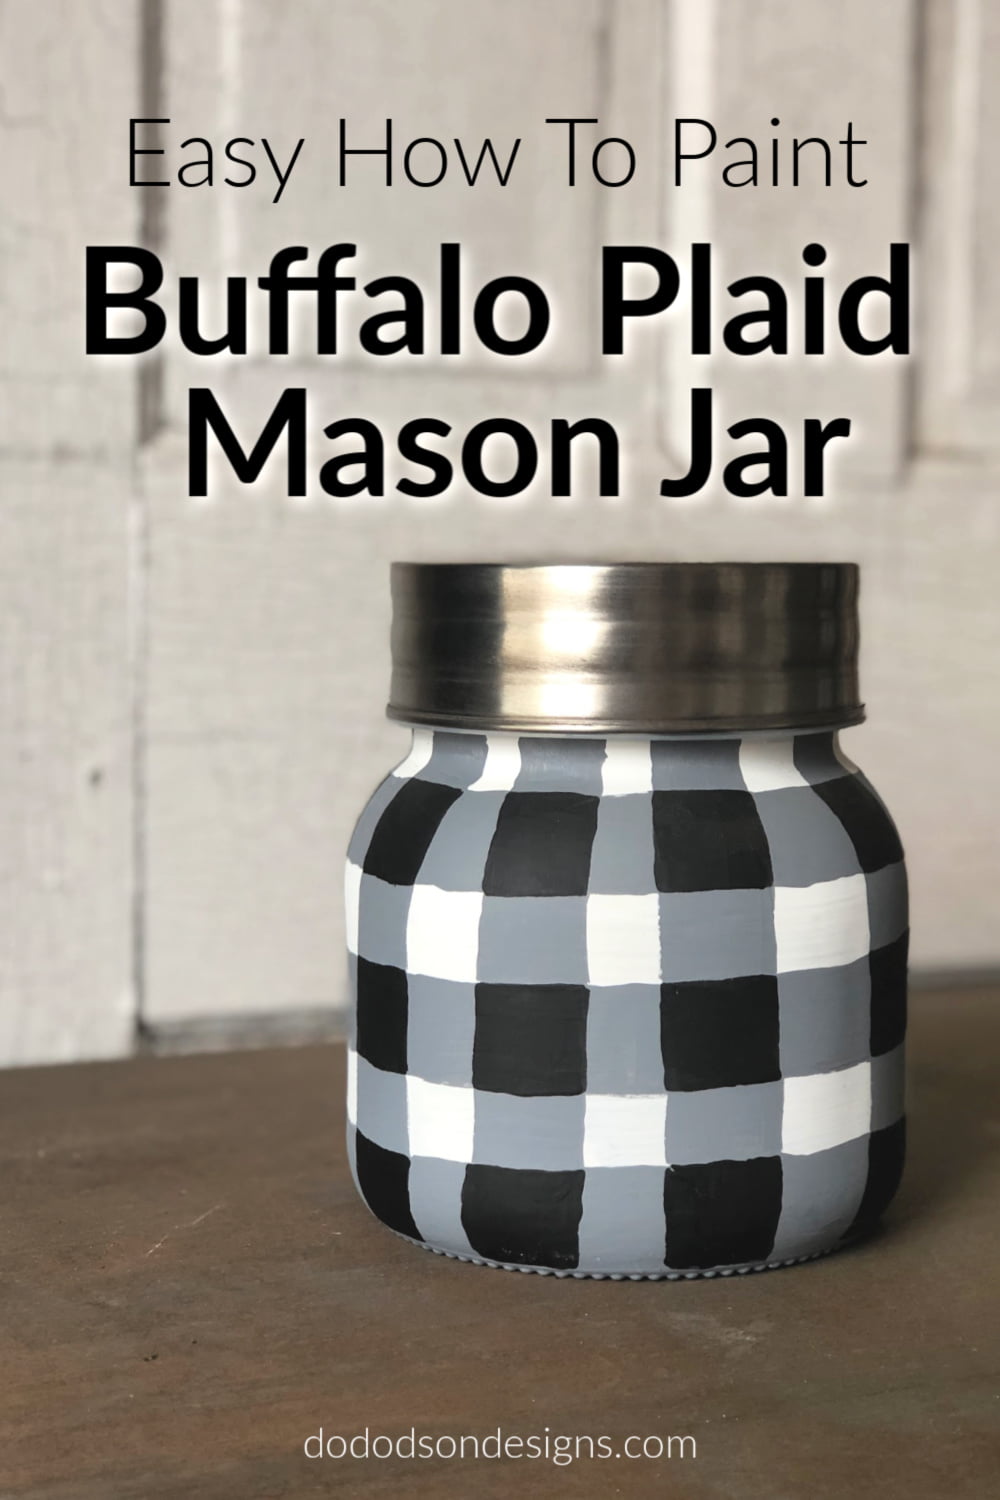 How To Paint A Rustic Buffalo Plaid Mason Jar Without Tape